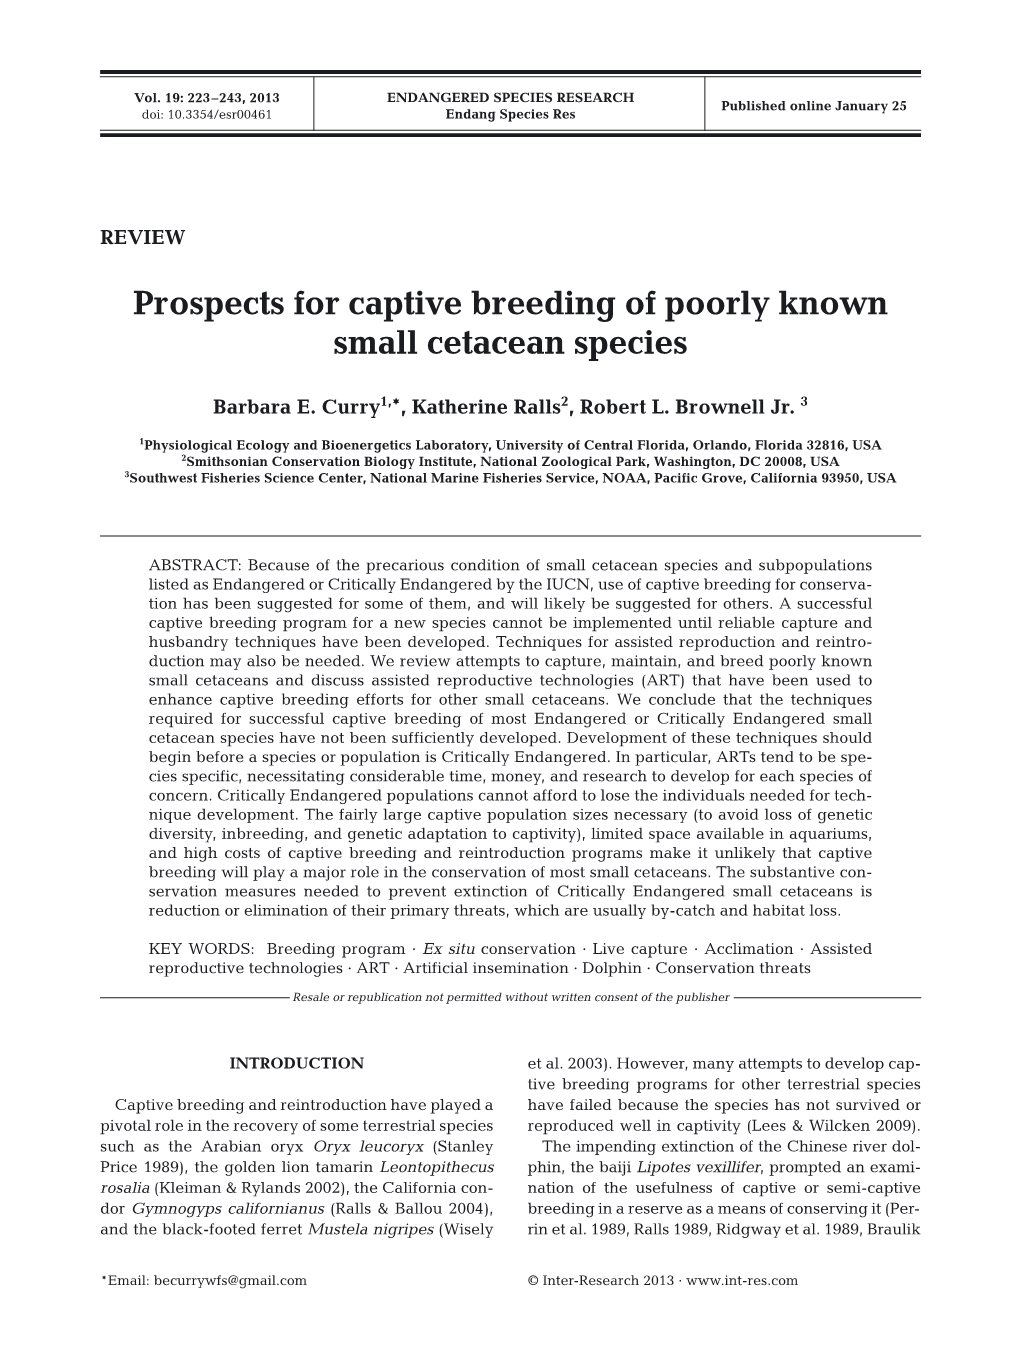 Prospects for Captive Breeding of Poorly Known Small Cetacean Species